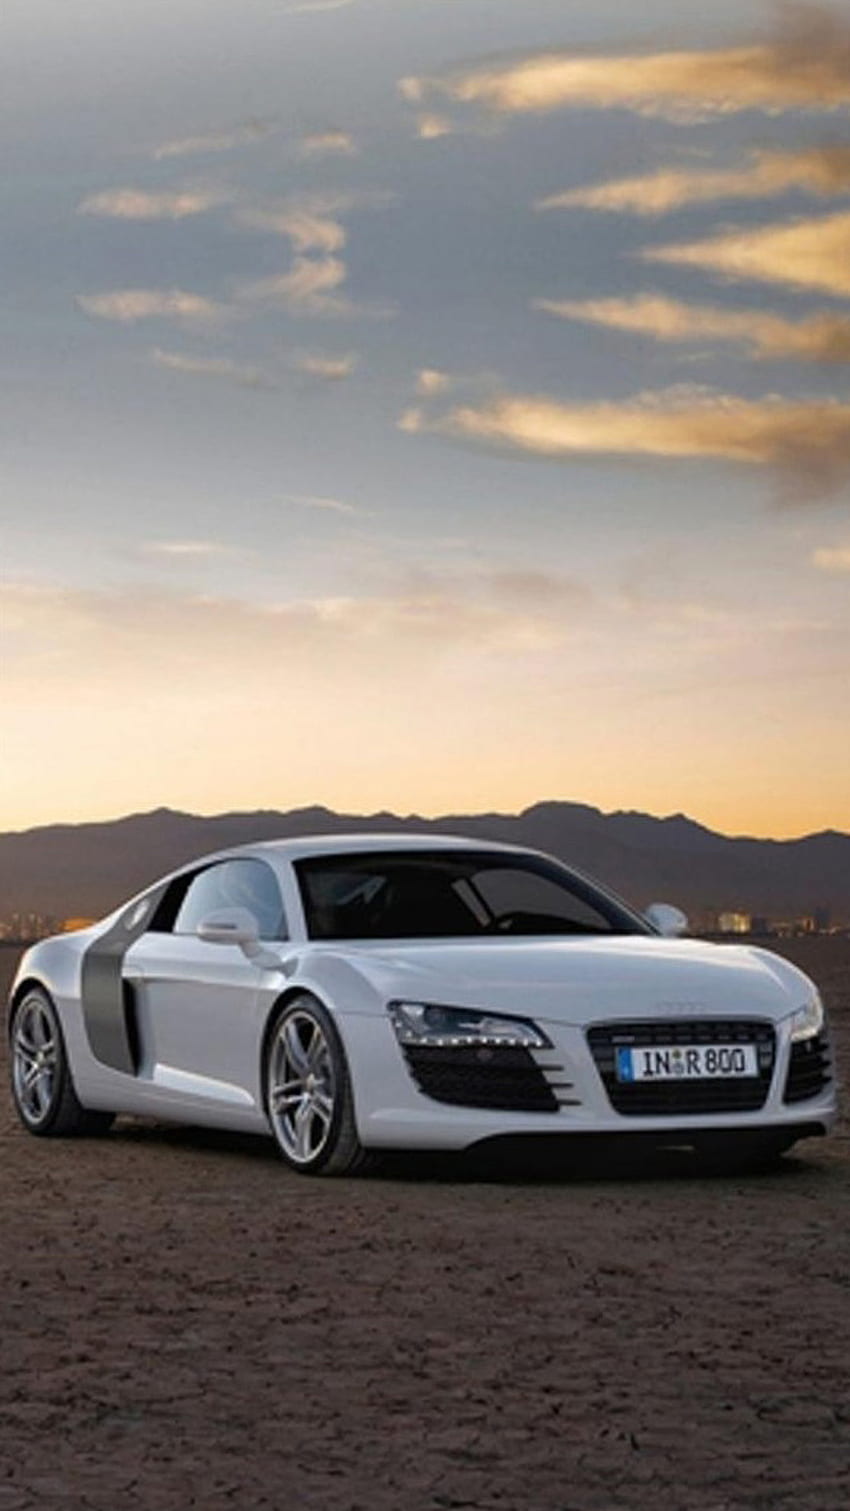 Car iPhone - Audi R8 iPhone Background -, Audi R8 Android HD phone wallpaper